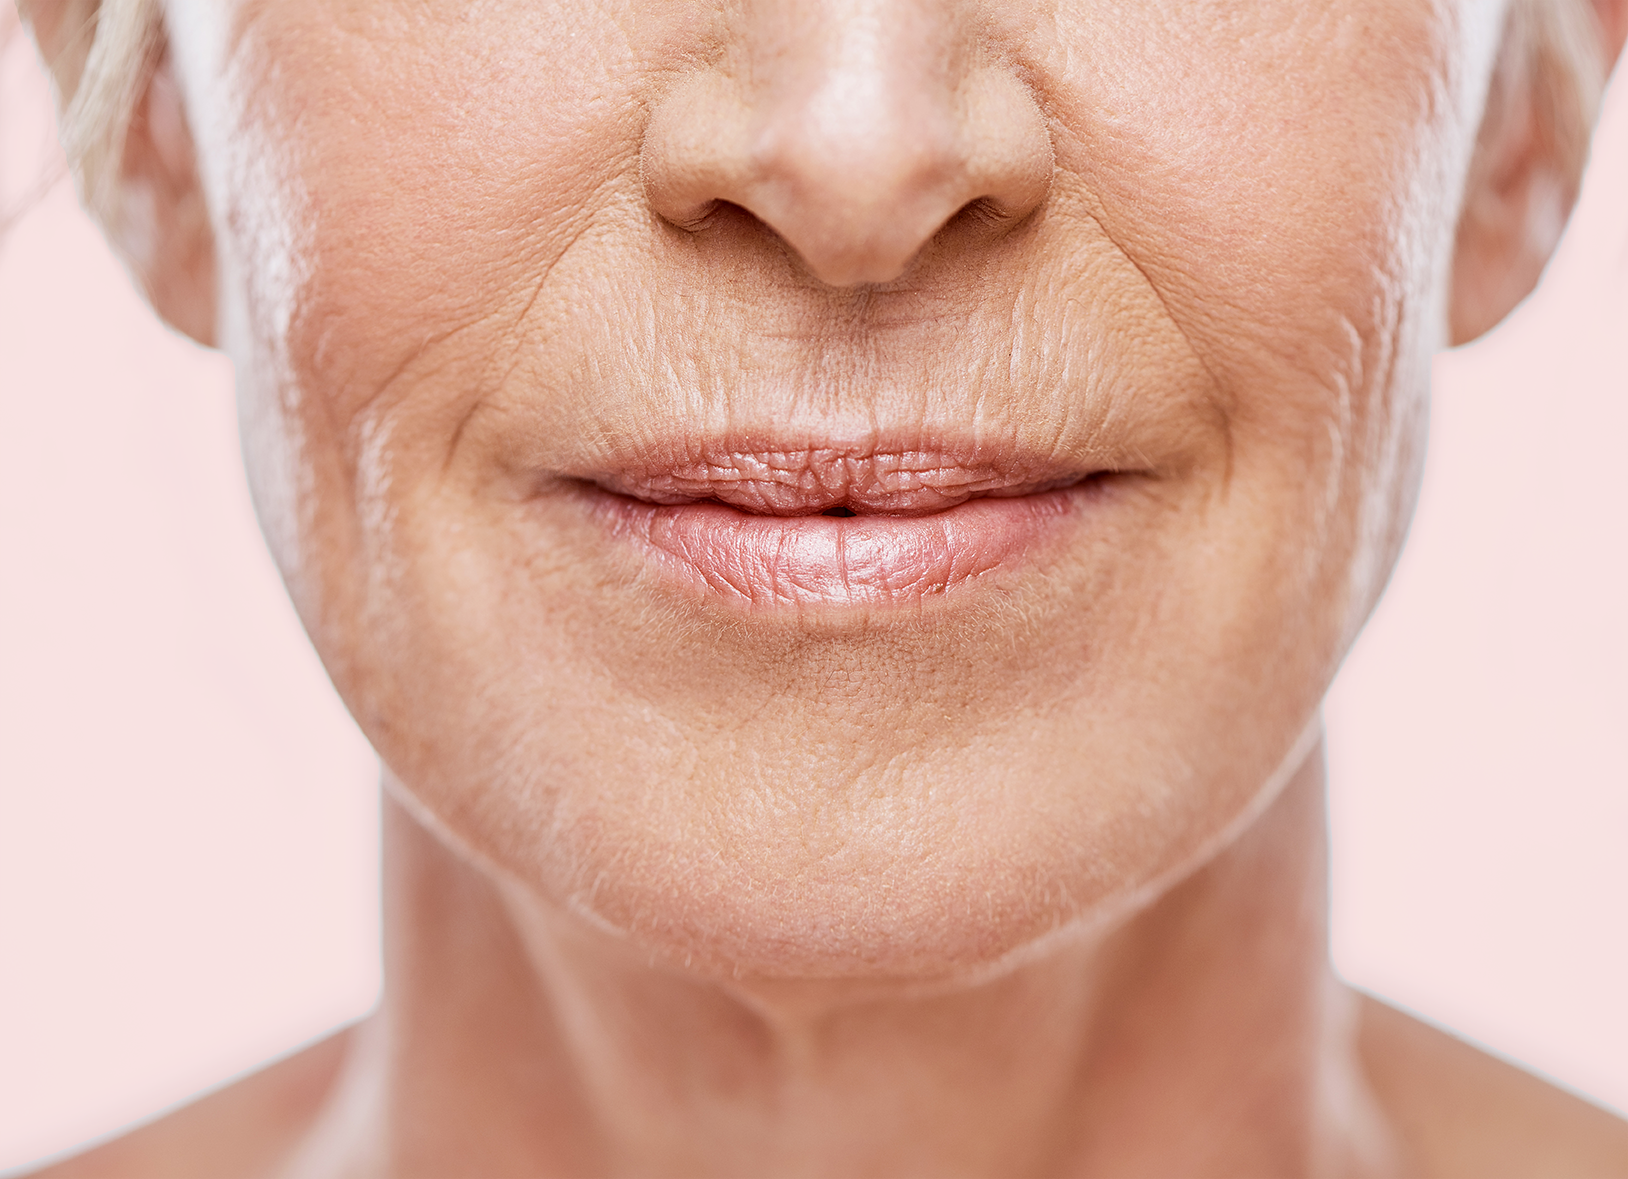 Fine lines: how to prevent and reduce fine lines and wrinkles